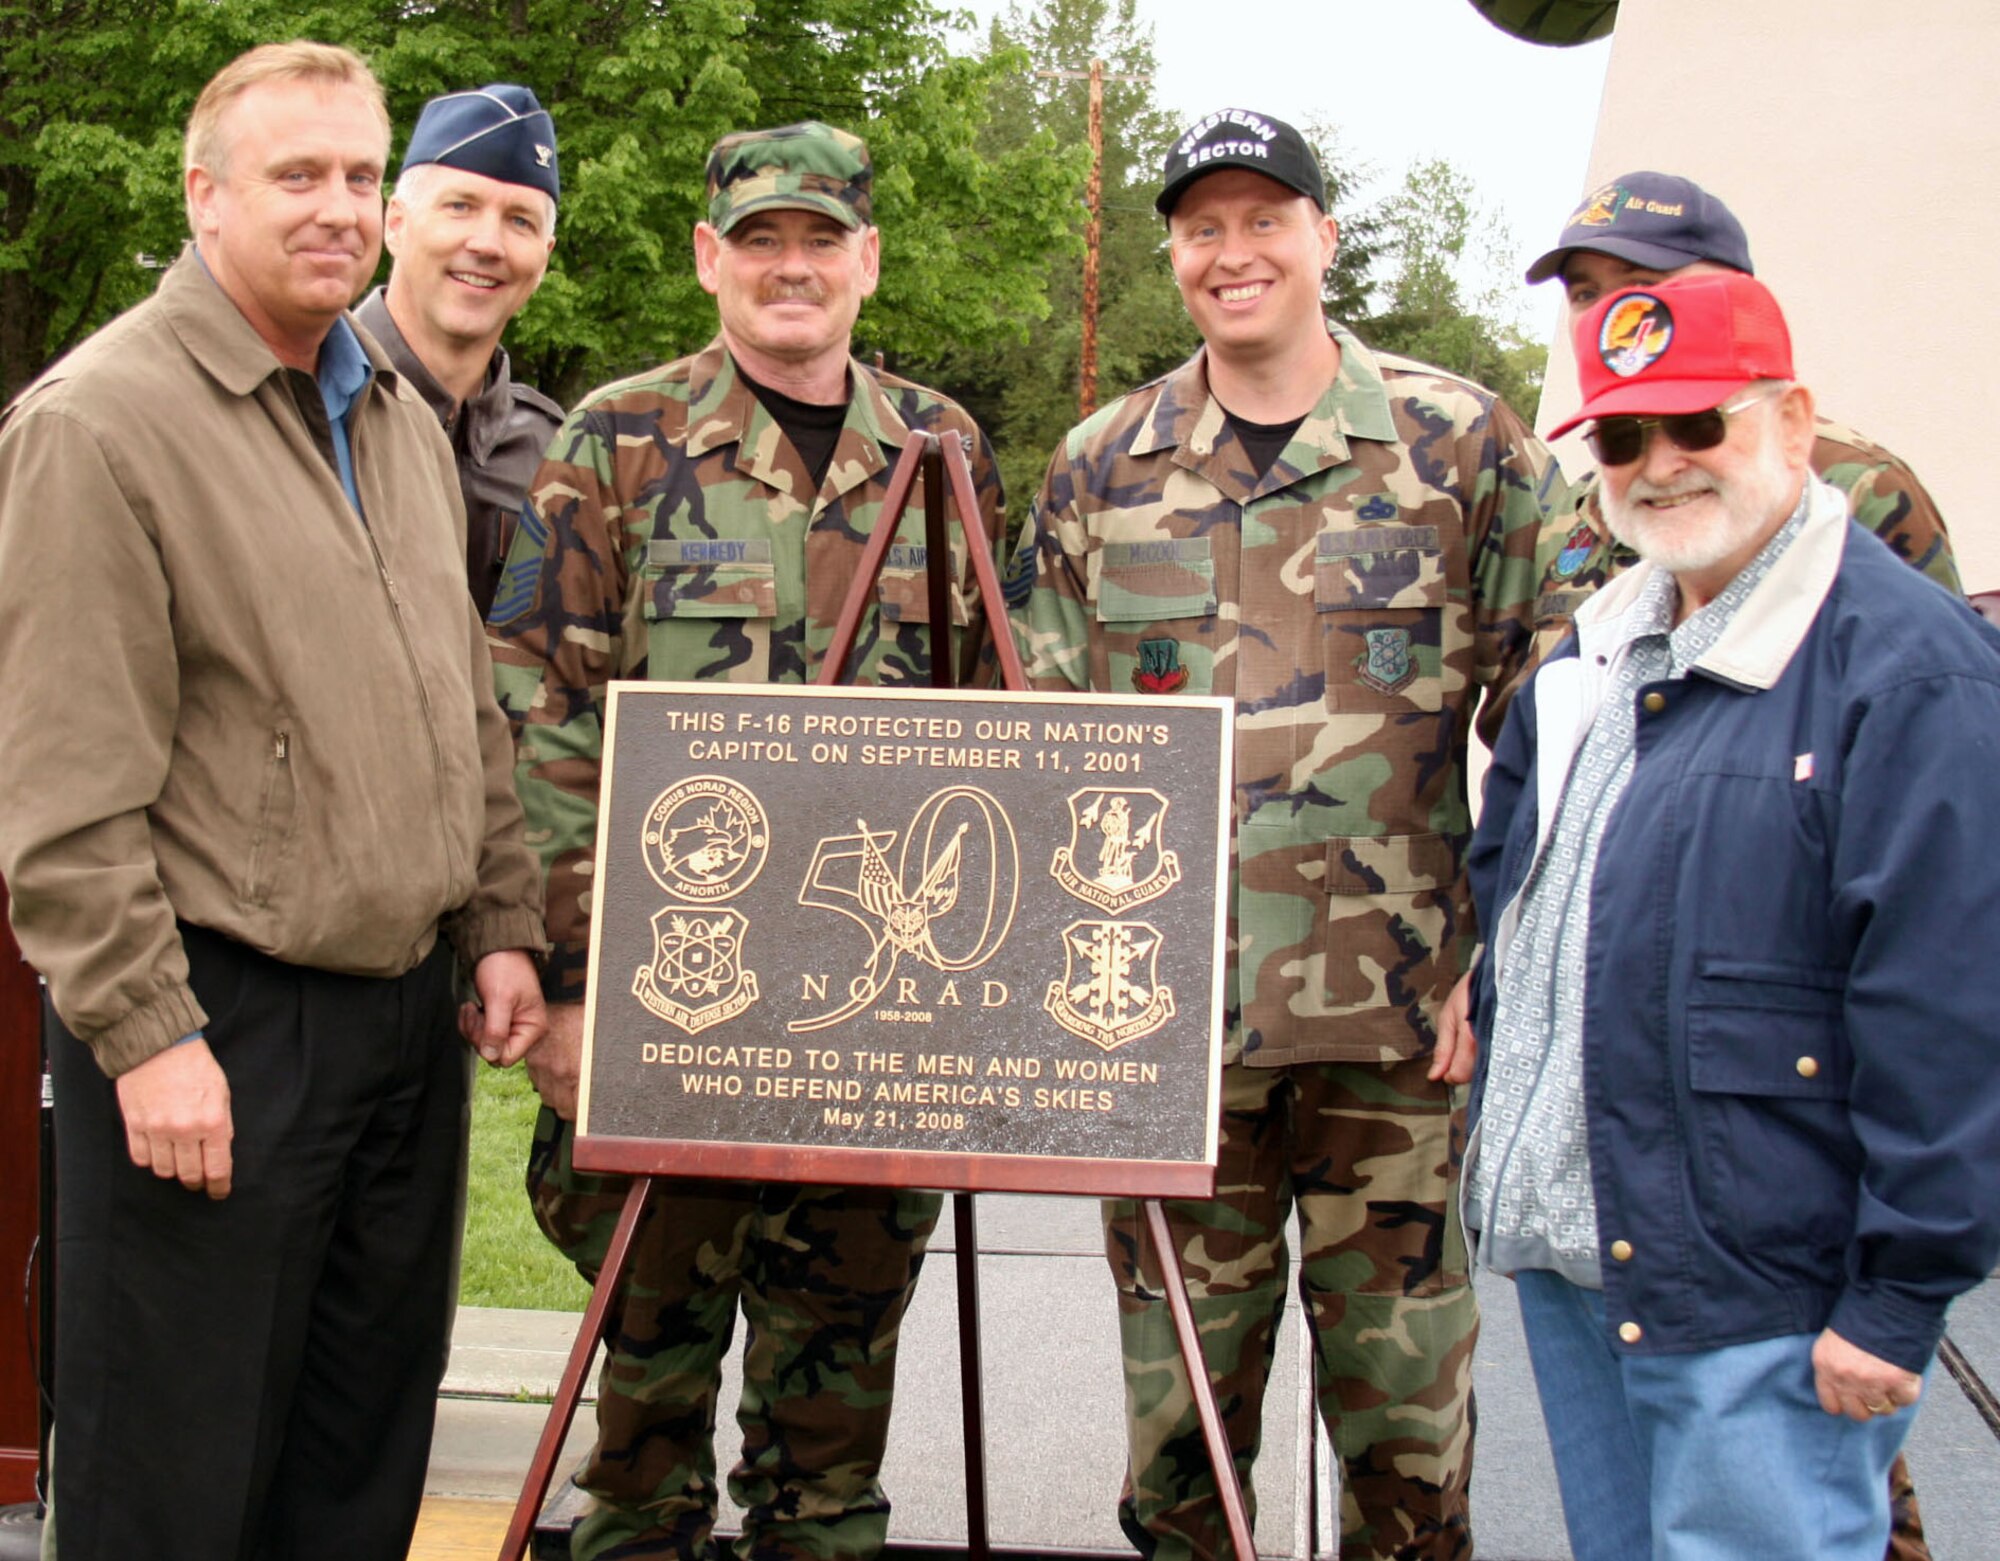 Joining Sector Commander Col. Paul Gruver, second from left, in unveiling the F-16 plaque were several key players in getting the aircraft ready for display. They are from left Mr. Greg Heidloff of WADS; Senior Master Sgt. John Kennedy from the 194th Operations Group; Master Sgt. Scott McCool of WADS; Master Sgt. James Roark (partially hidden) from Arizona's 162nd Fighter Wing, and Mr. Ken Roberts, representing McChord Air Museum. (U.S. Air Force photo/Randy Rubattino)